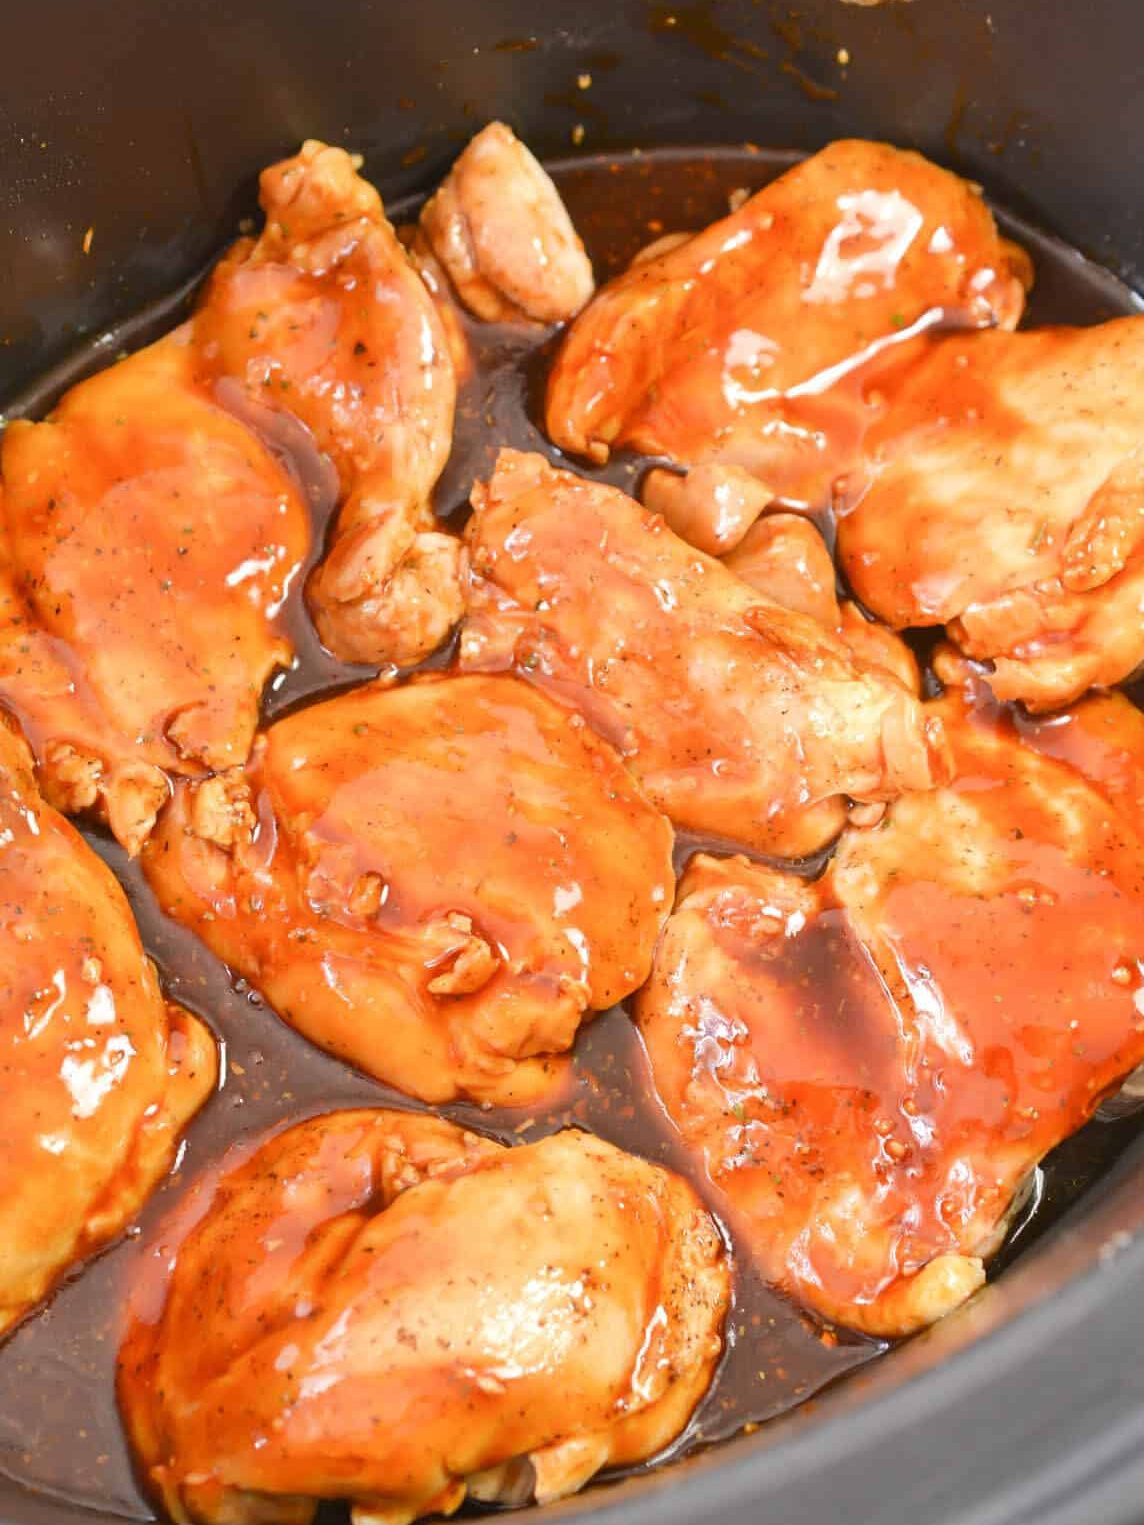 Mix all the ingredients and pour over the chicken thighs on the crockpot.